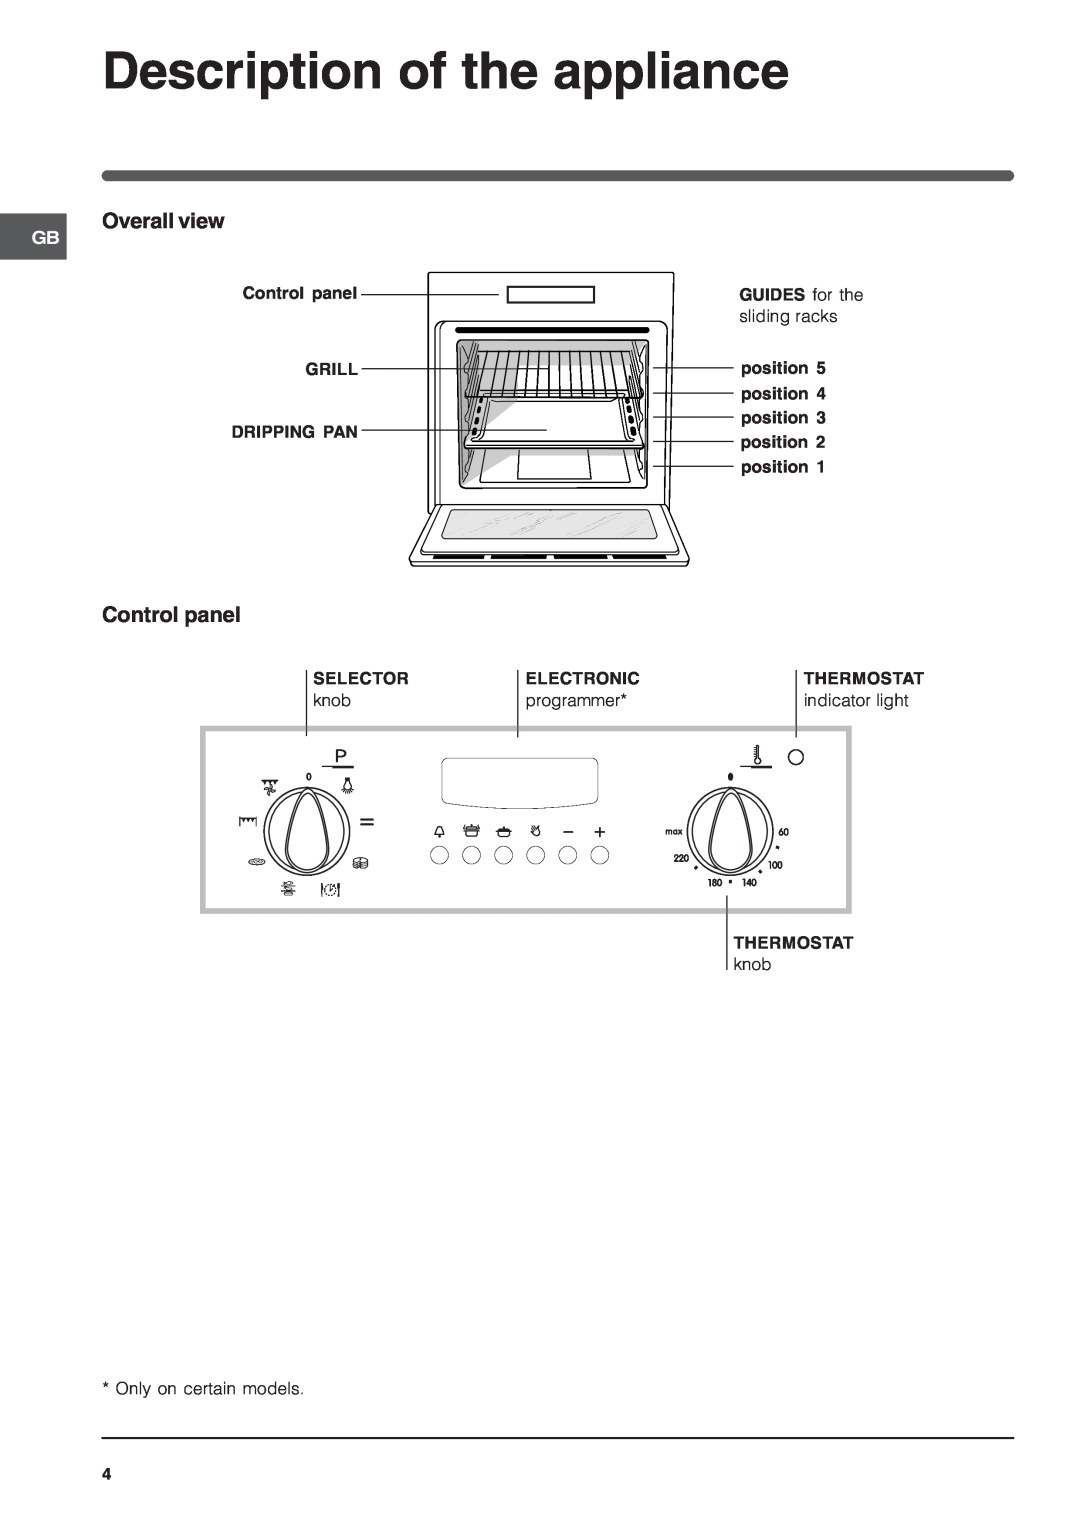 Indesit FIE 76 KC.A GB Description of the appliance, Overall view, Control panel GRILL DRIPPING PAN, SELECTOR knob 